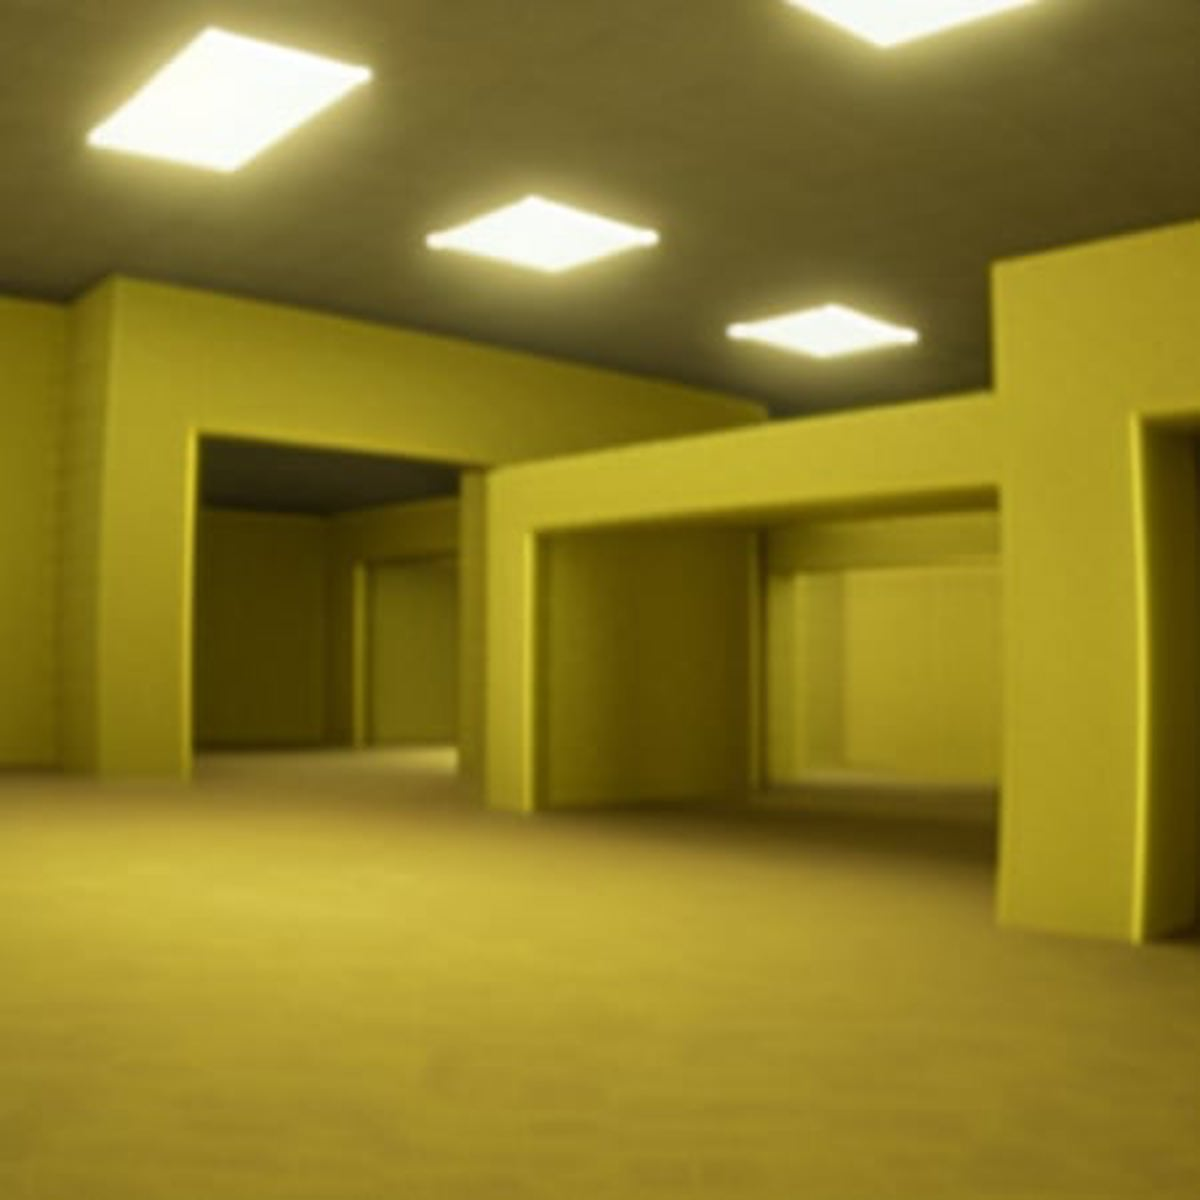 the backrooms level 0, Stable Diffusion